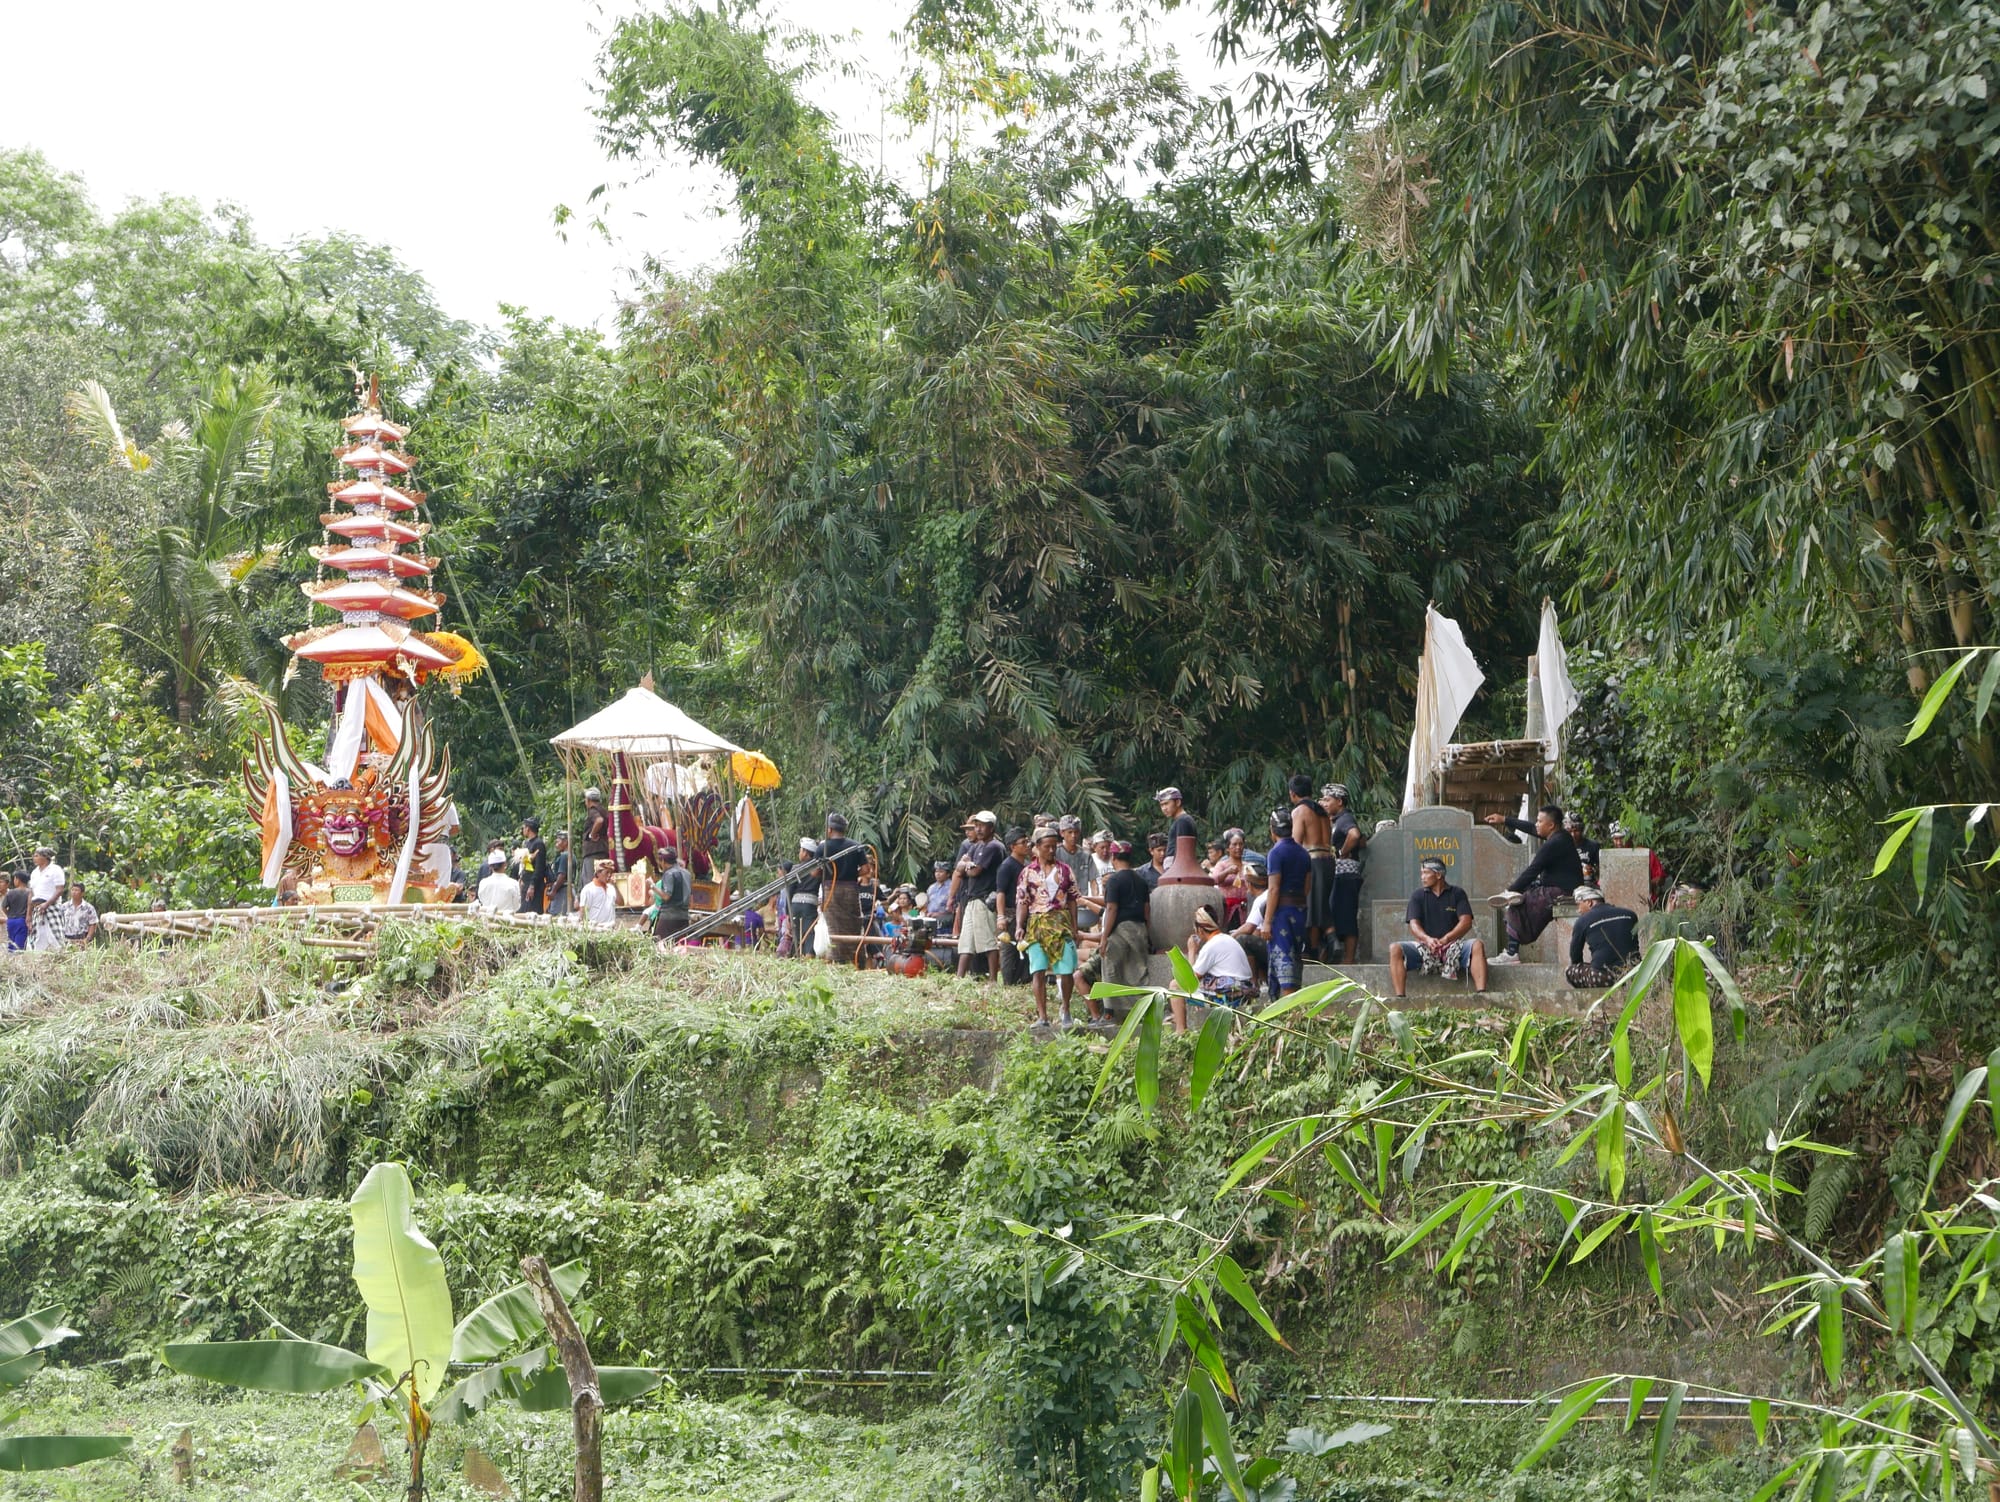 Photo by Author — a cremation procession in Bali